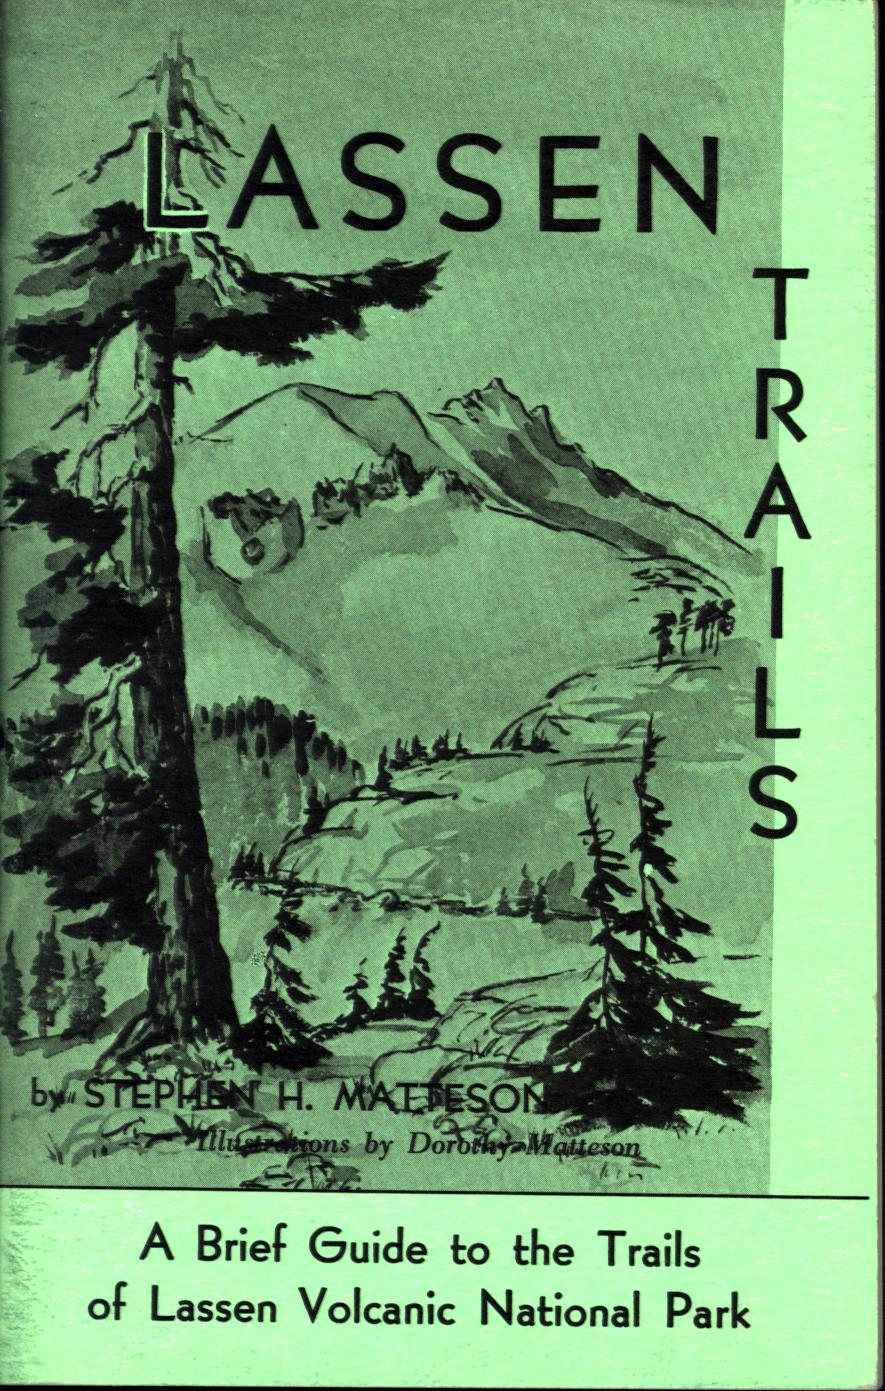 LASSEN TRAILS: a brief guide to the trails of Lassen Volcanic National Park. by Stephen H. Matteson. 